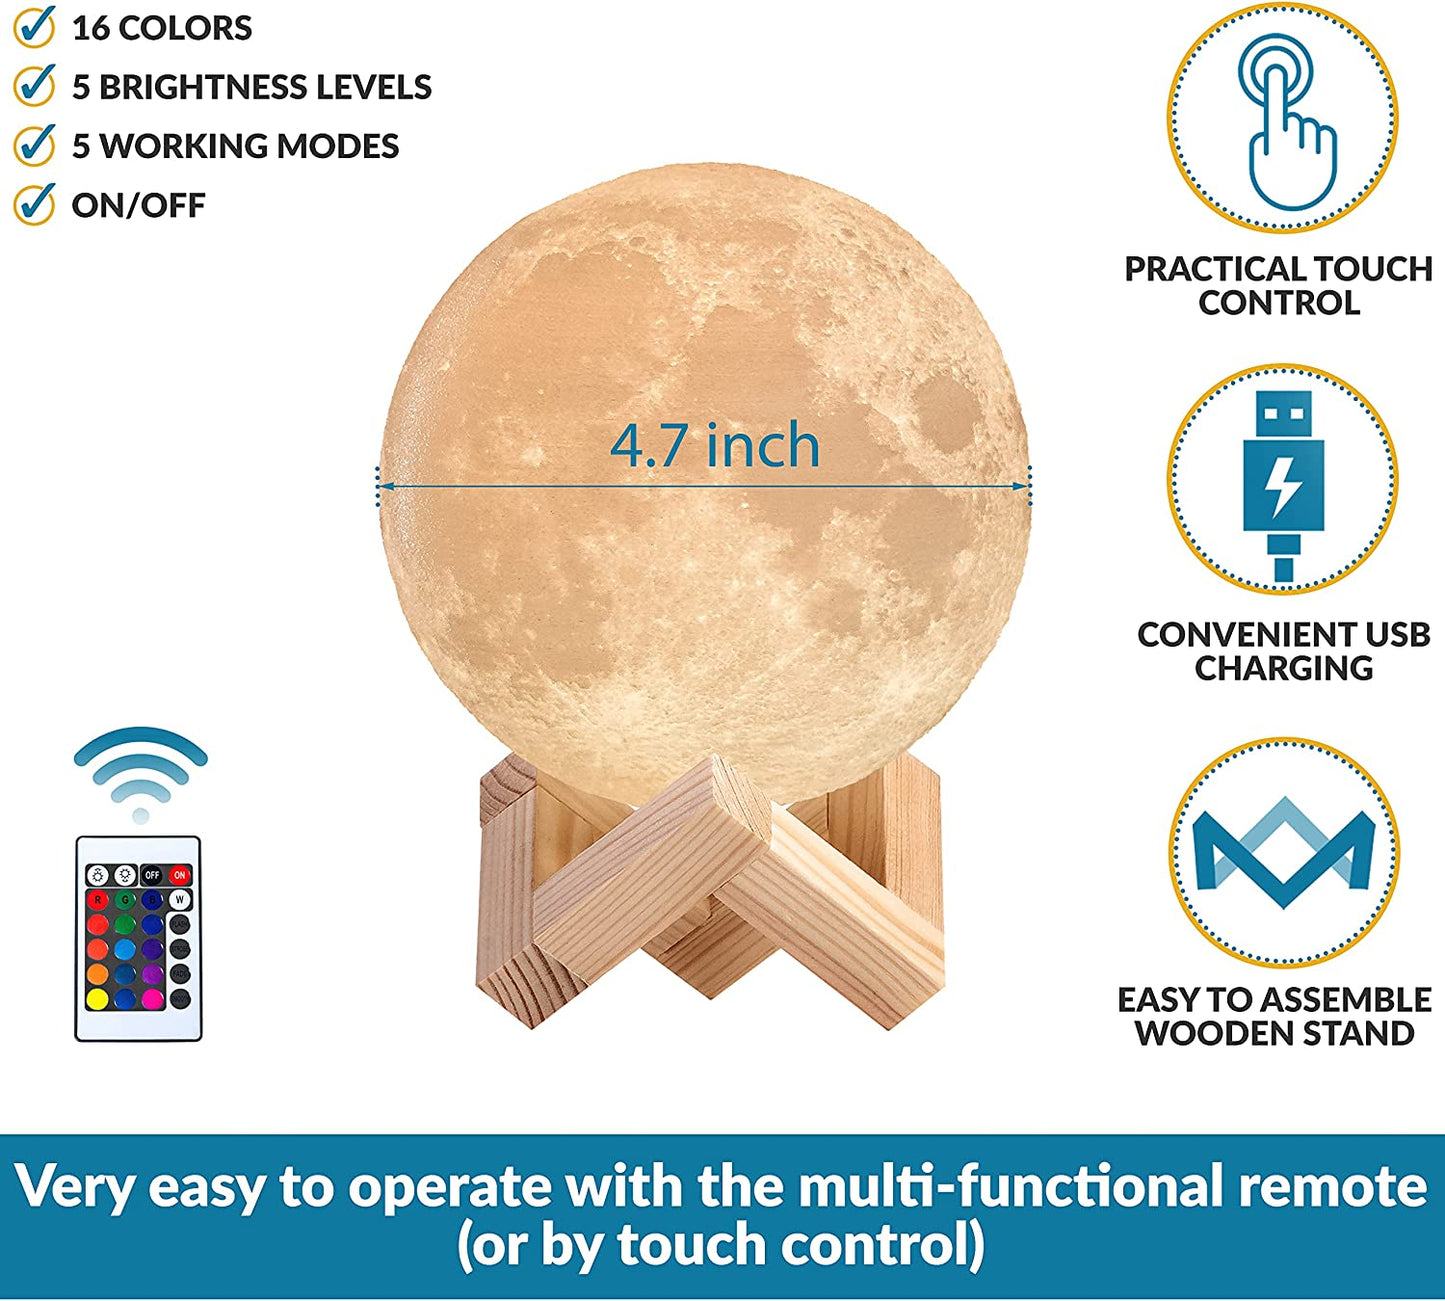 3D Moon Lamp by Mind-glowing - Kids Moon Night Light, 4.7 inch, 16 LED Colors, Wood Stand, Remote Control, Cool Birthday Gift for 9 10 11 12 Year Old Girls, Cute Astrology Bedroom Moon Decor for Women